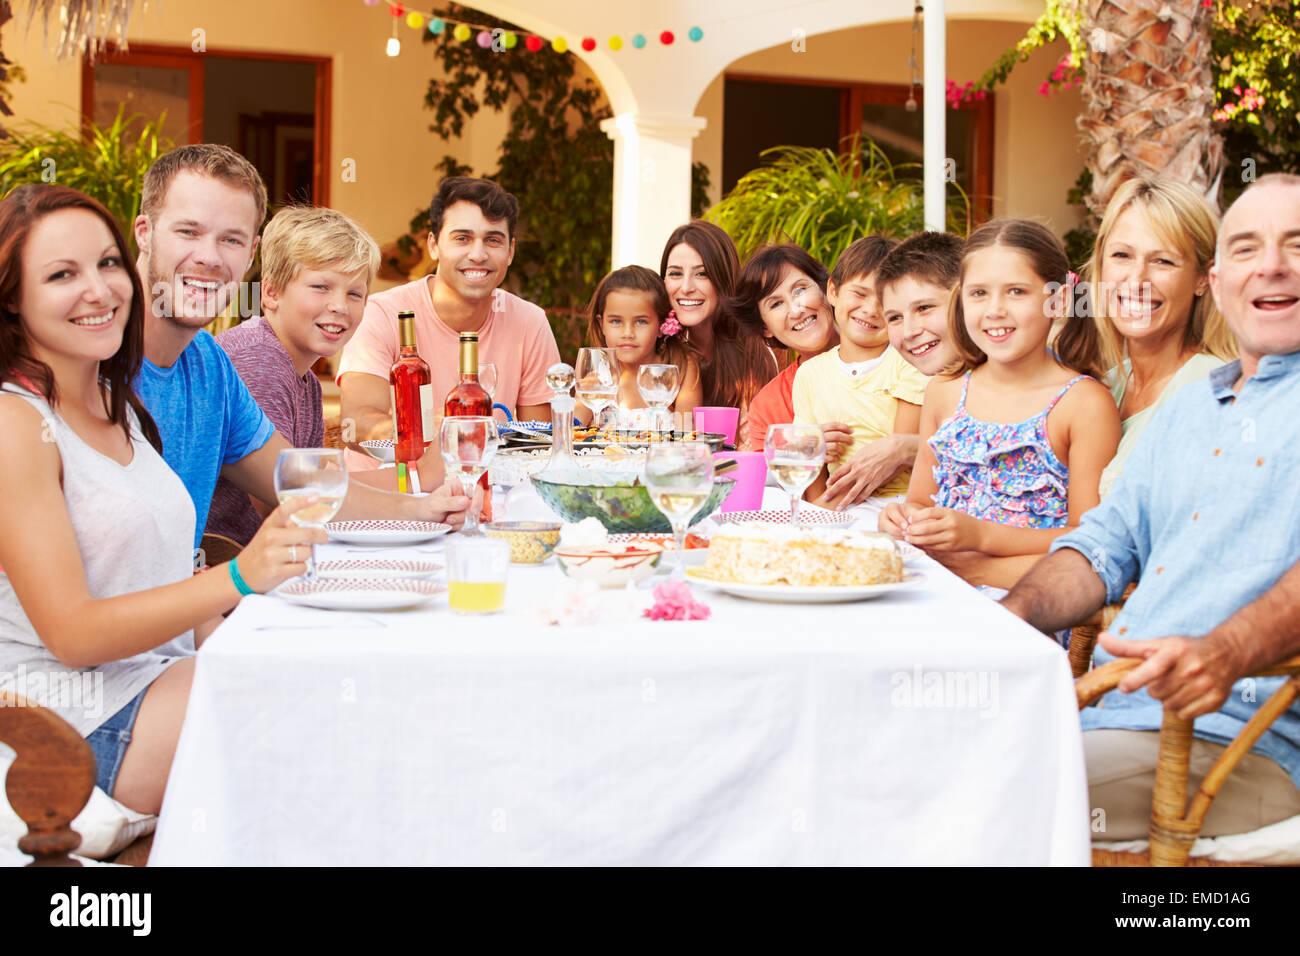 Large Family Group Enjoying Meal On Terrace Together Stock Photo